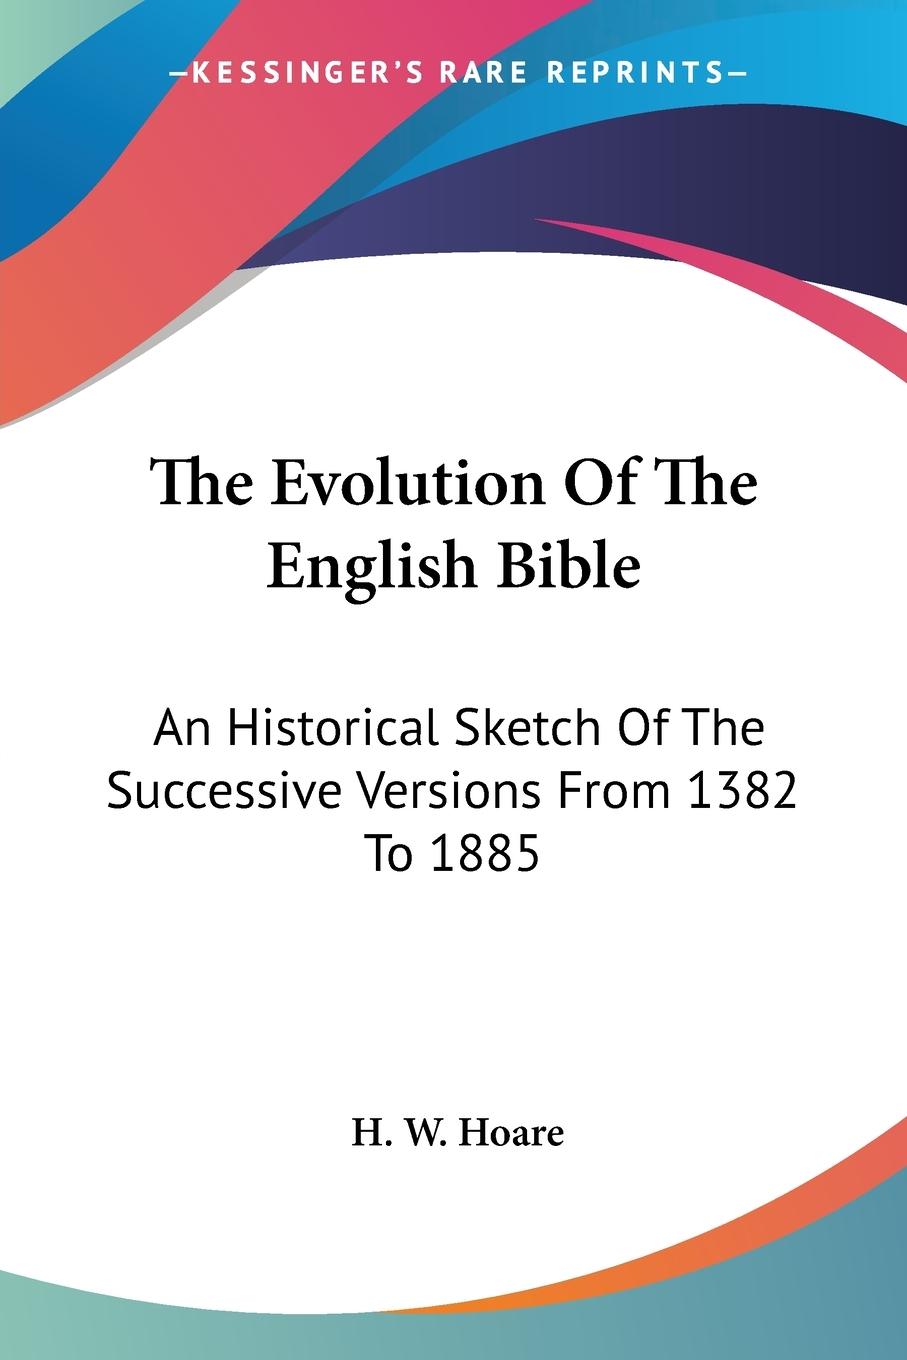 The Evolution Of The English Bible - Hoare, H. W.